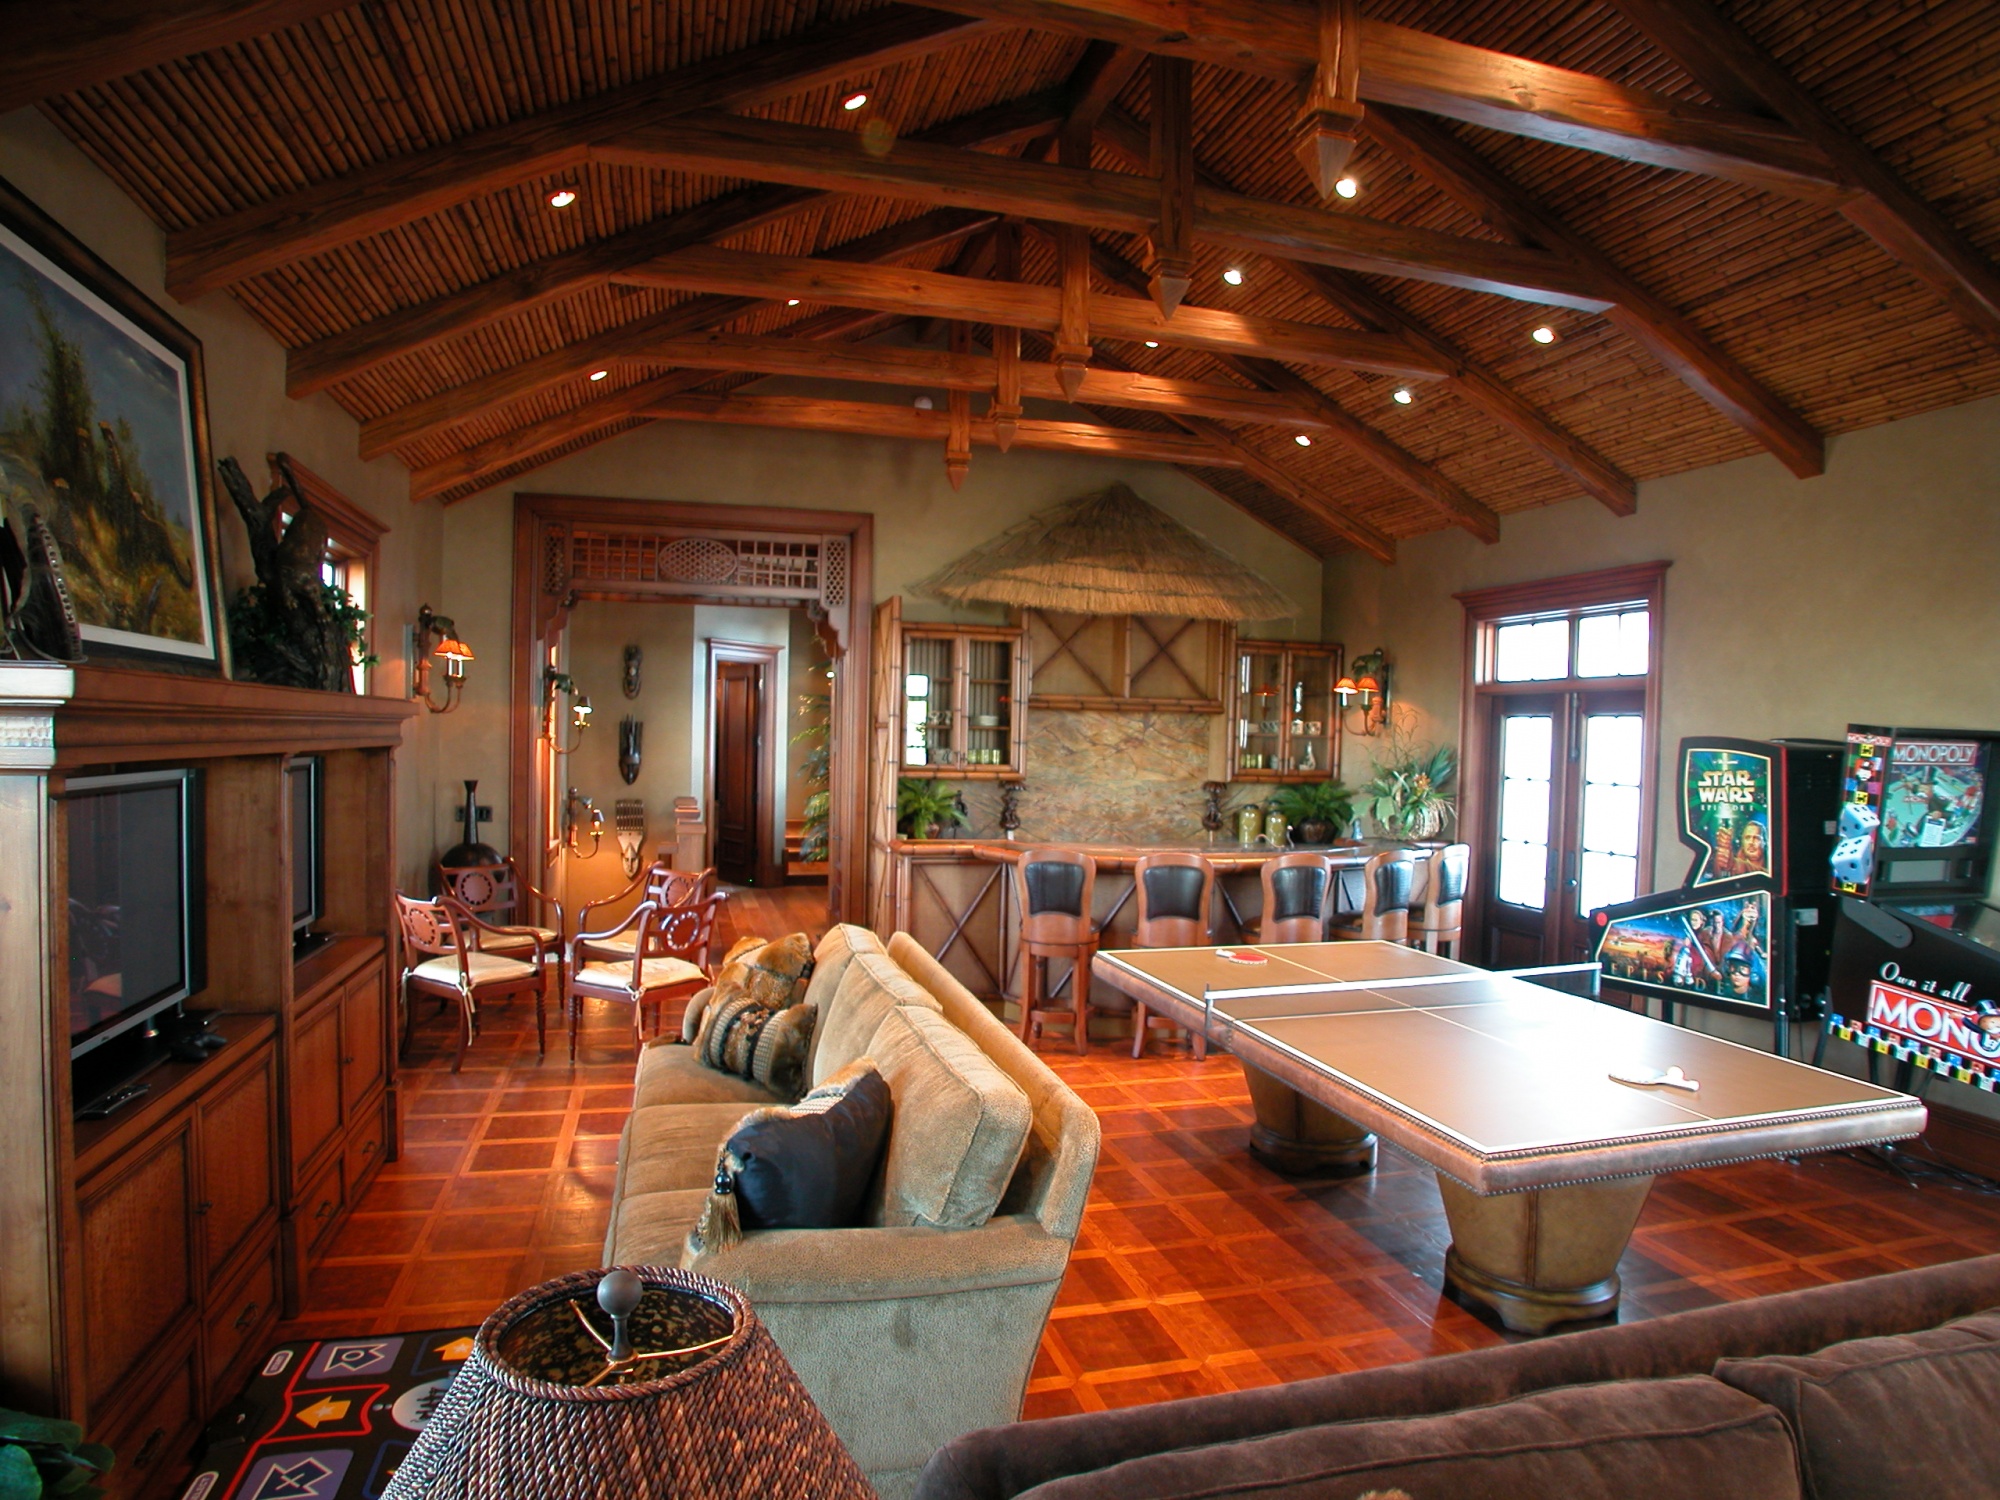 The children's playroom features hand carved pine beams.